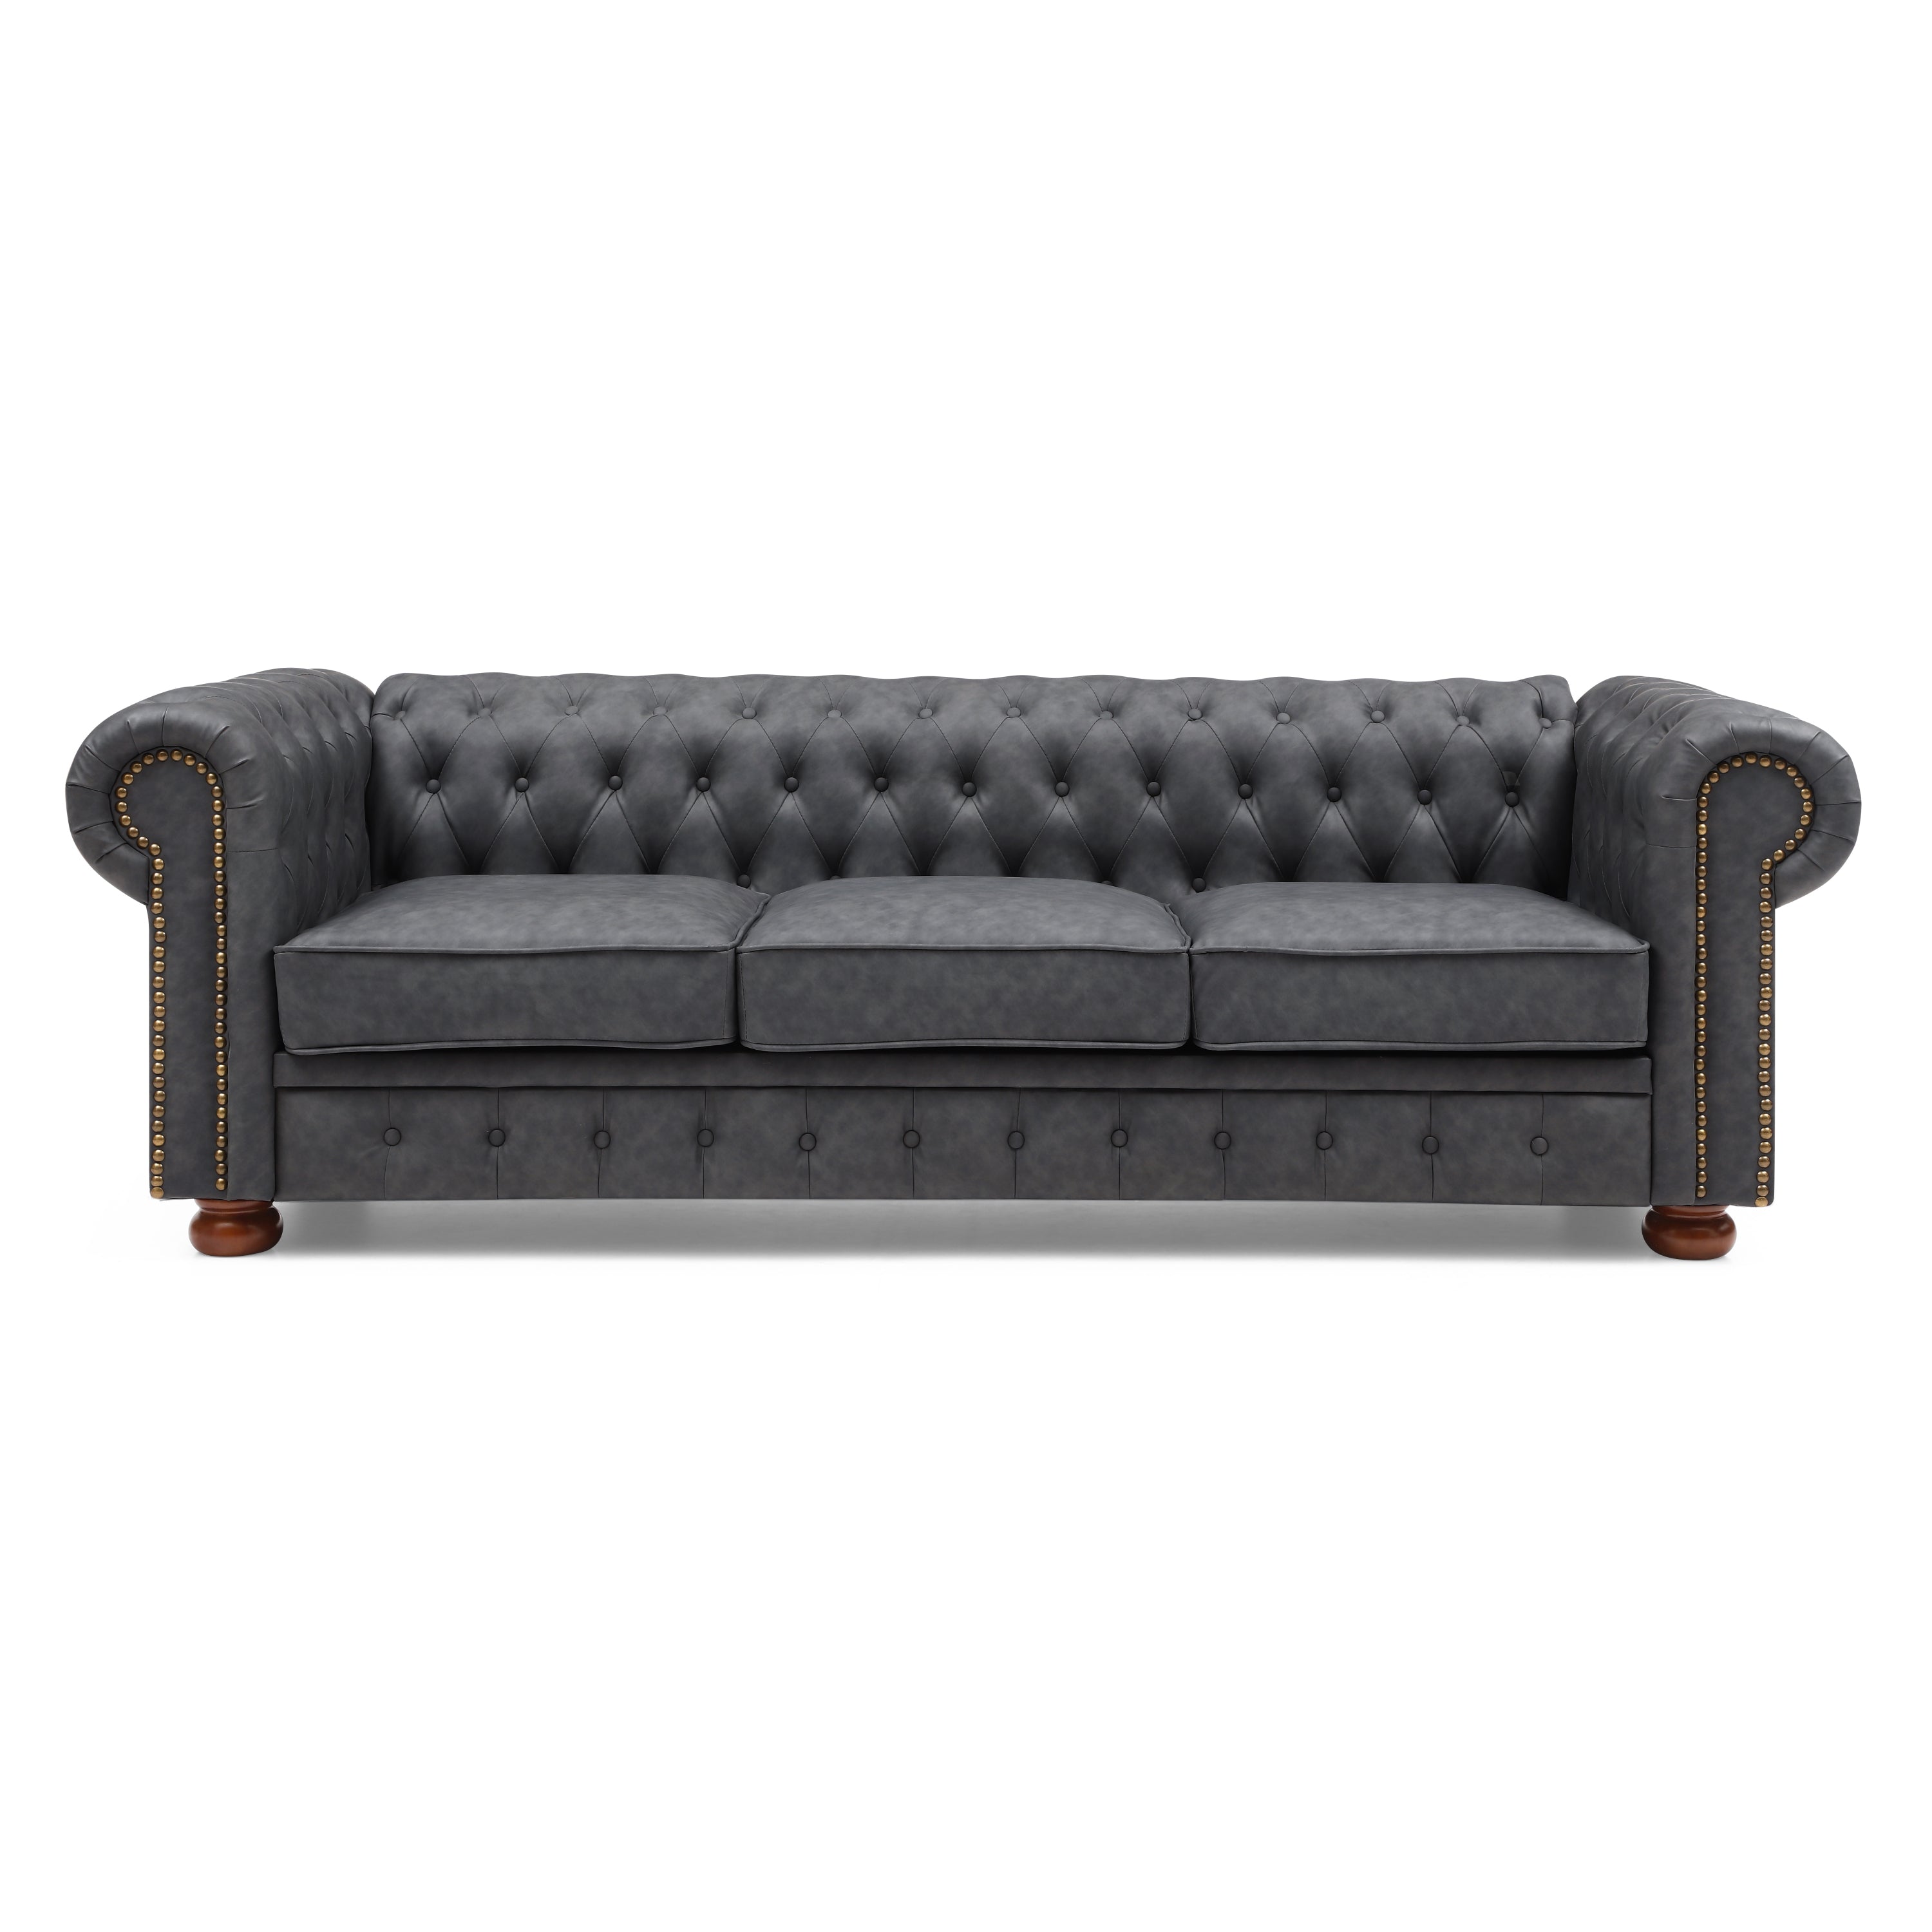 Calvin 88.5" Gray Faux Leather Chesterfield Sofa